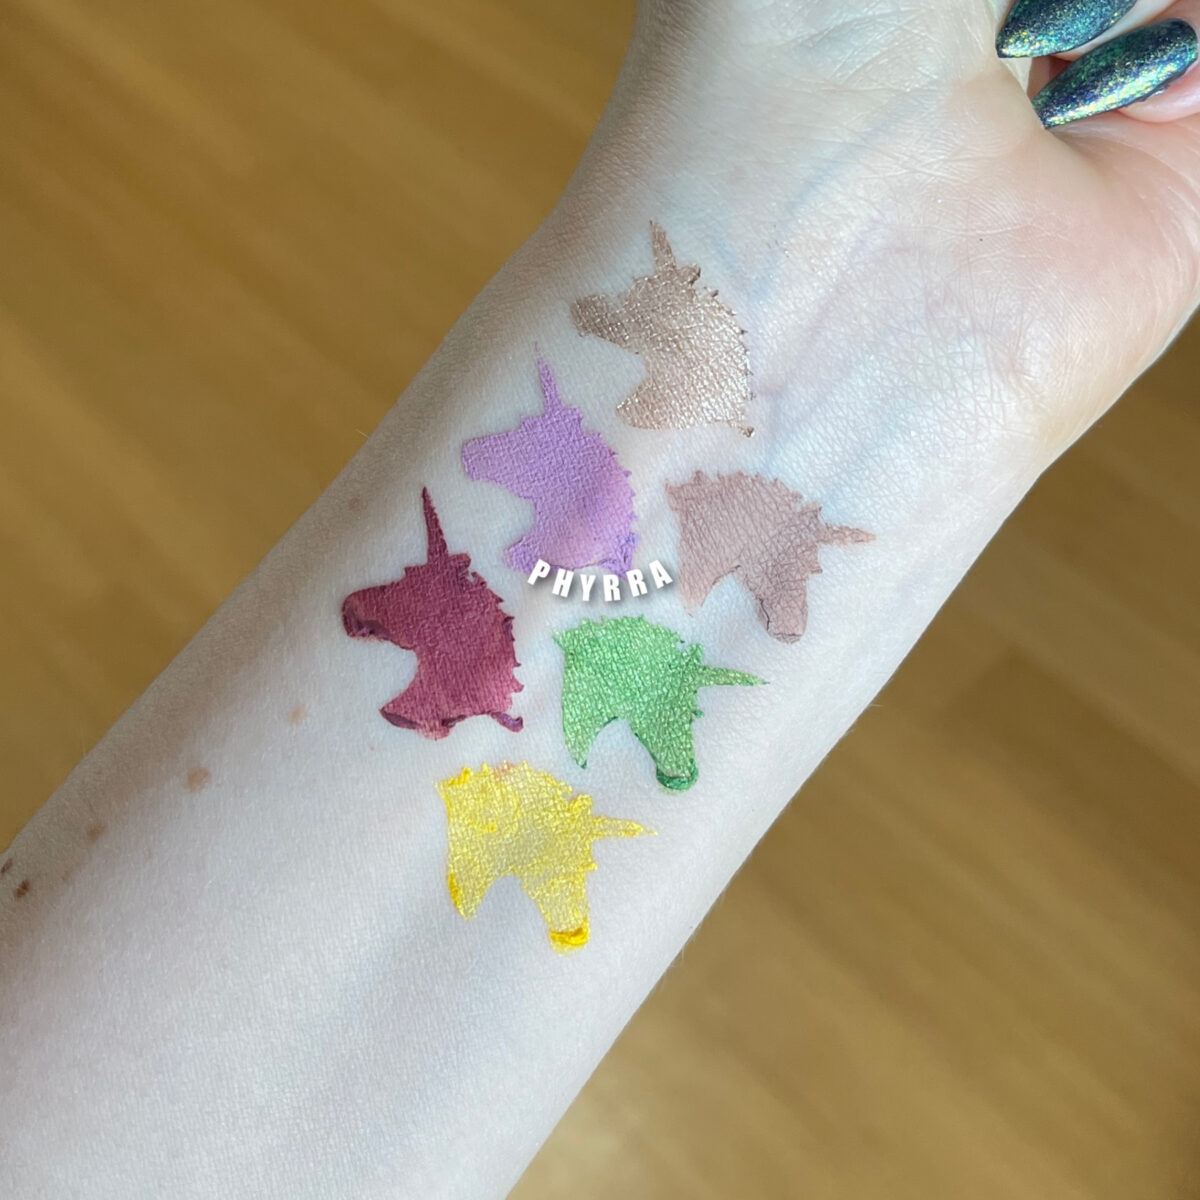 Lime Crime Electric Slide Eyeshadow Sticks Review swatches on pale skin